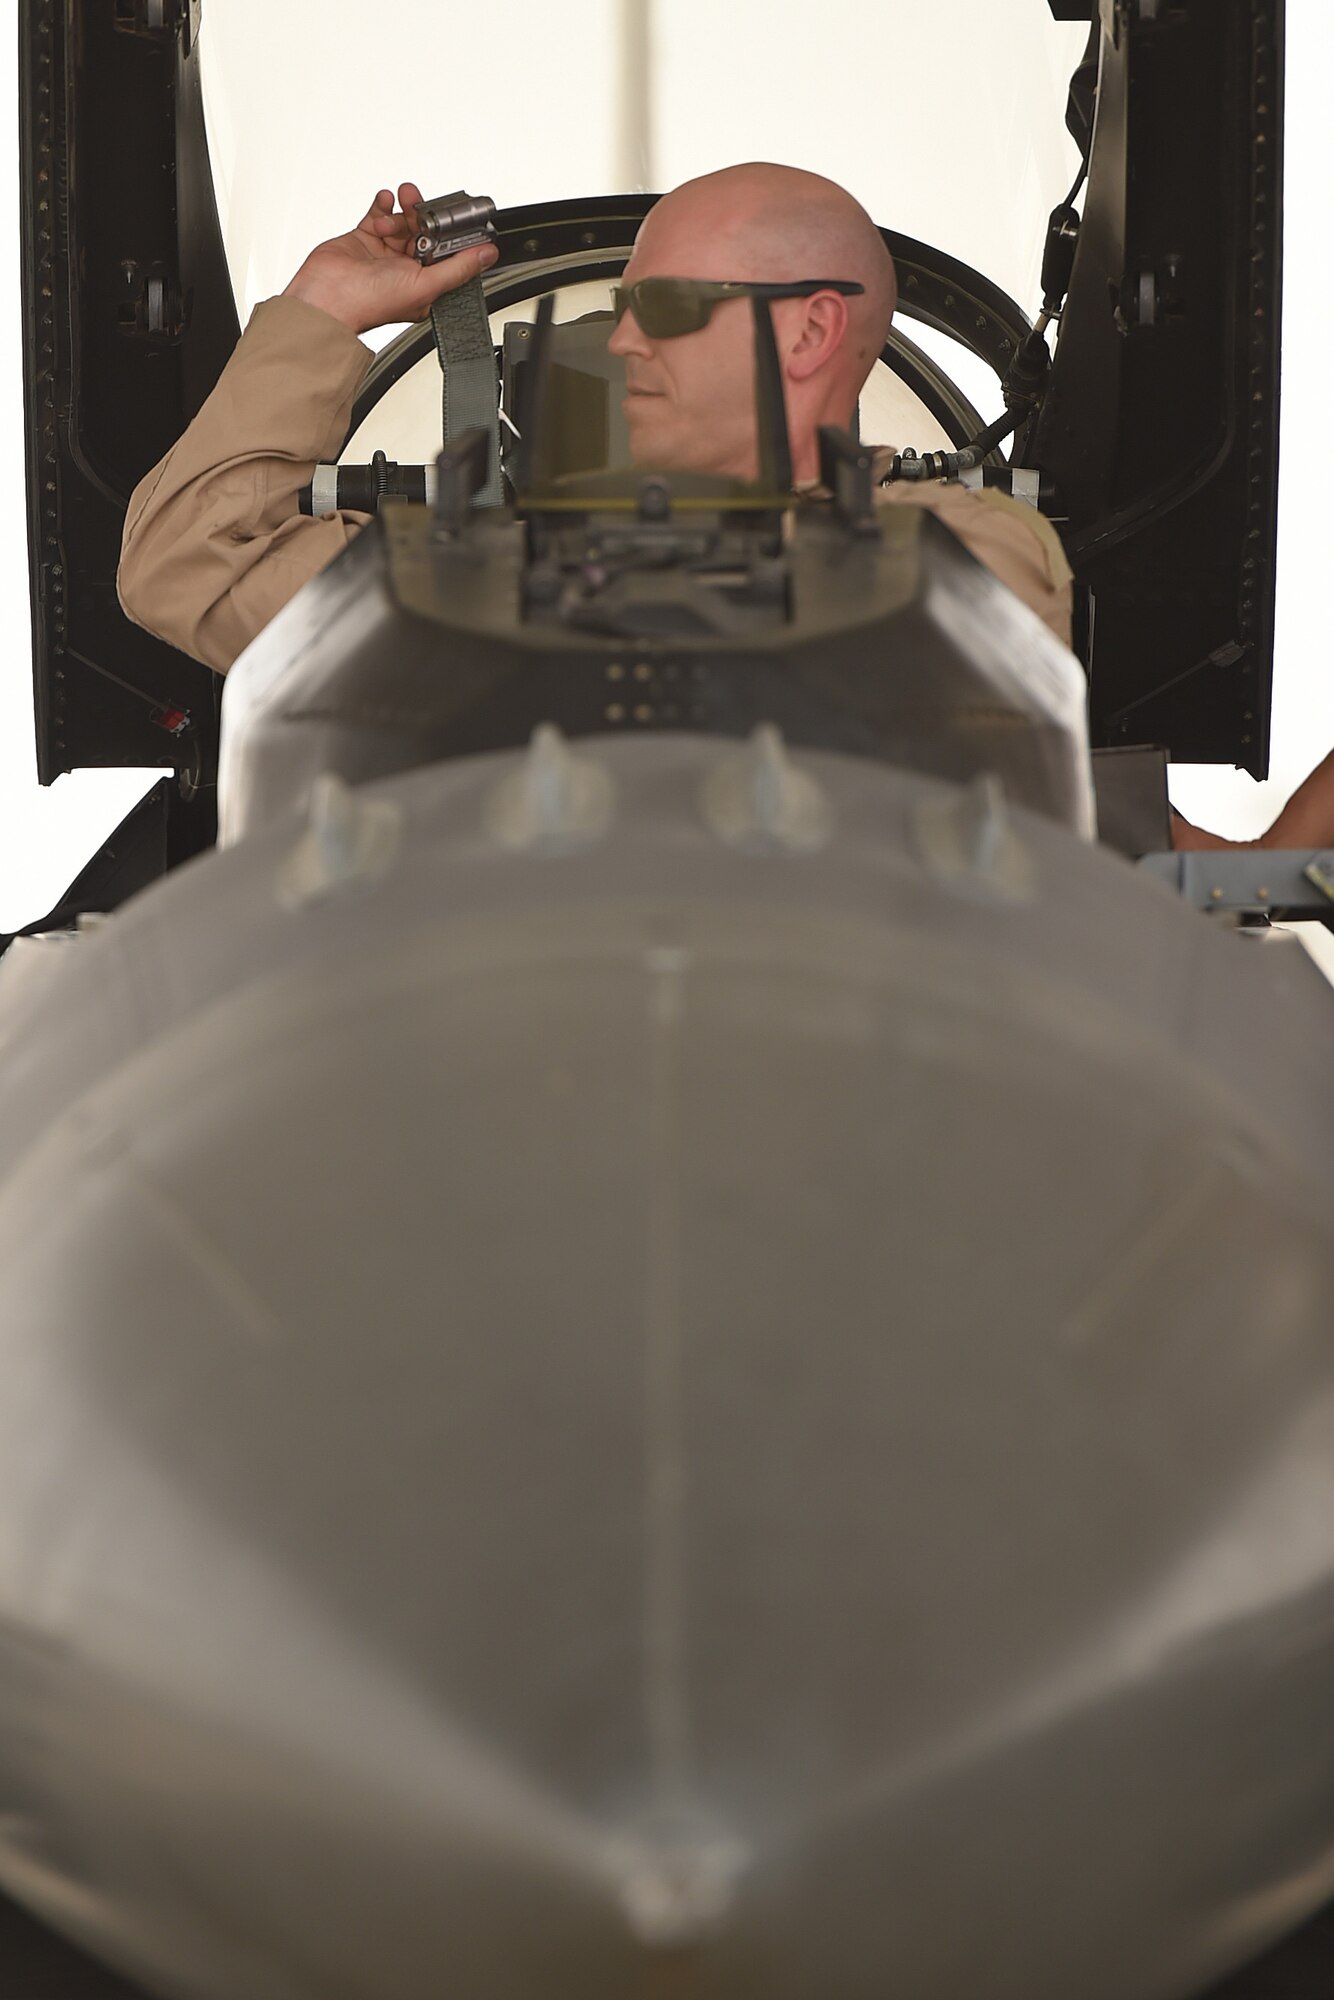 A pilot sits in the seat of a fighter aircraft